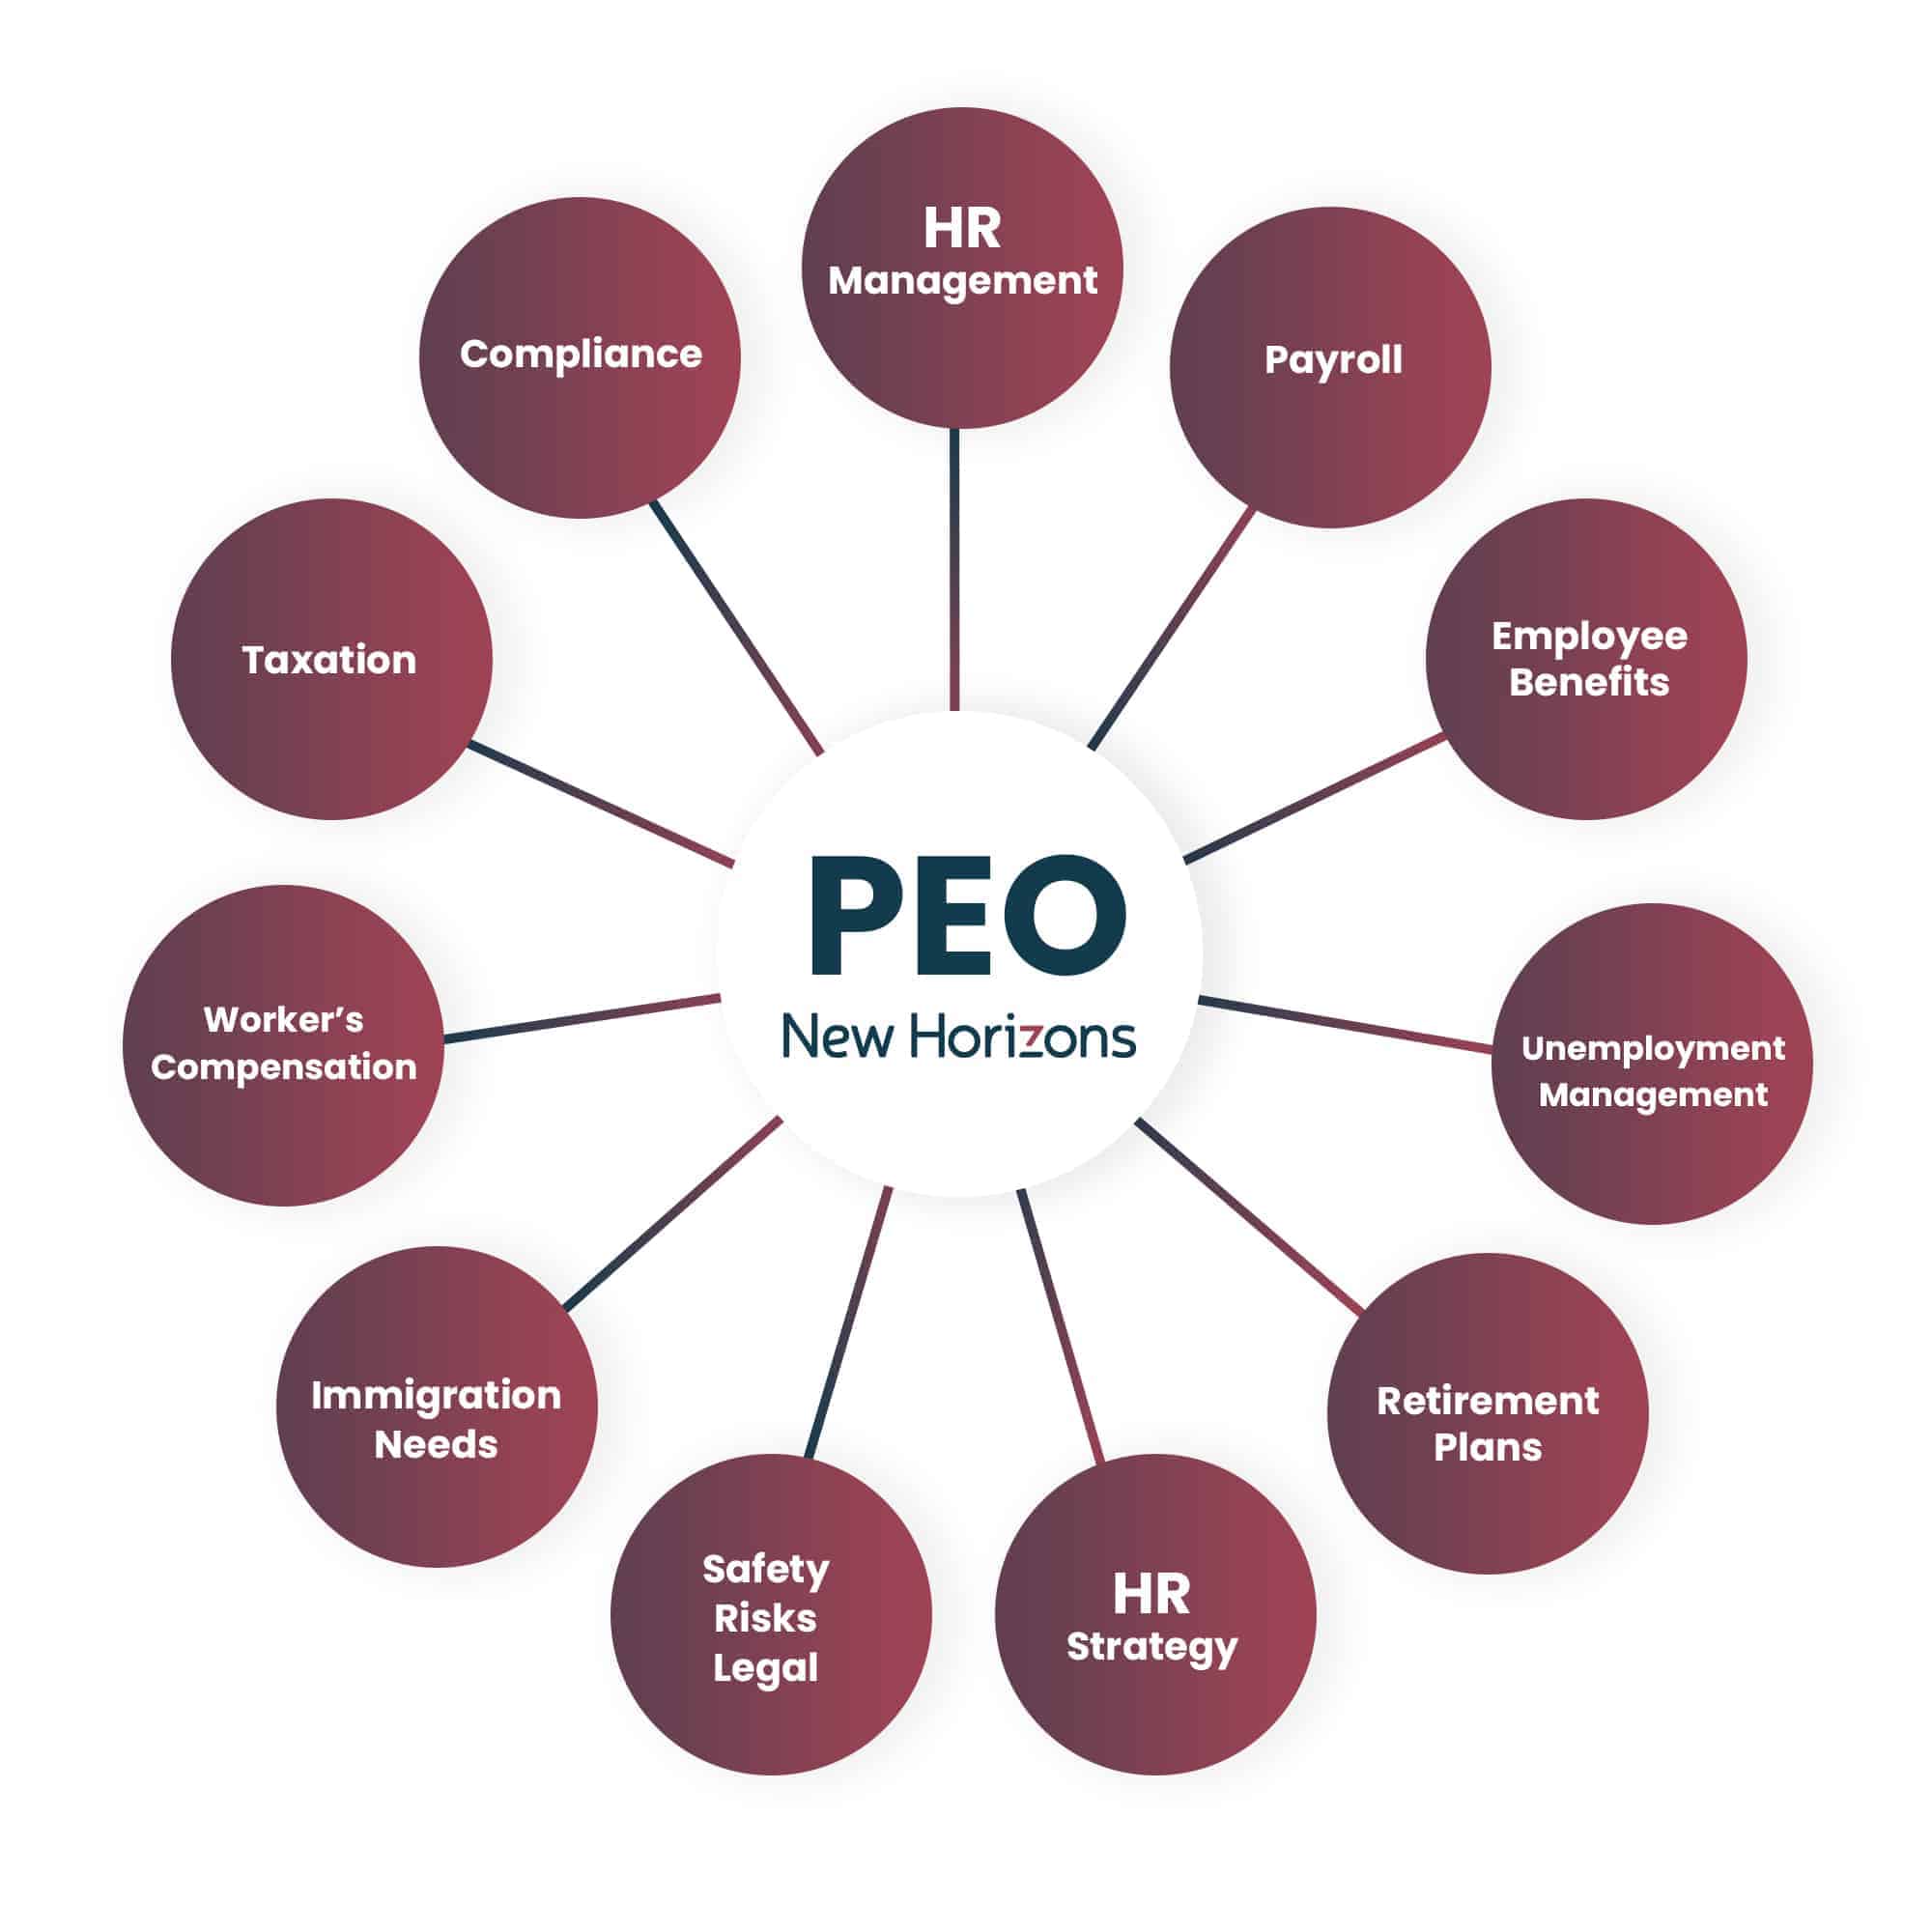 What is a PEO